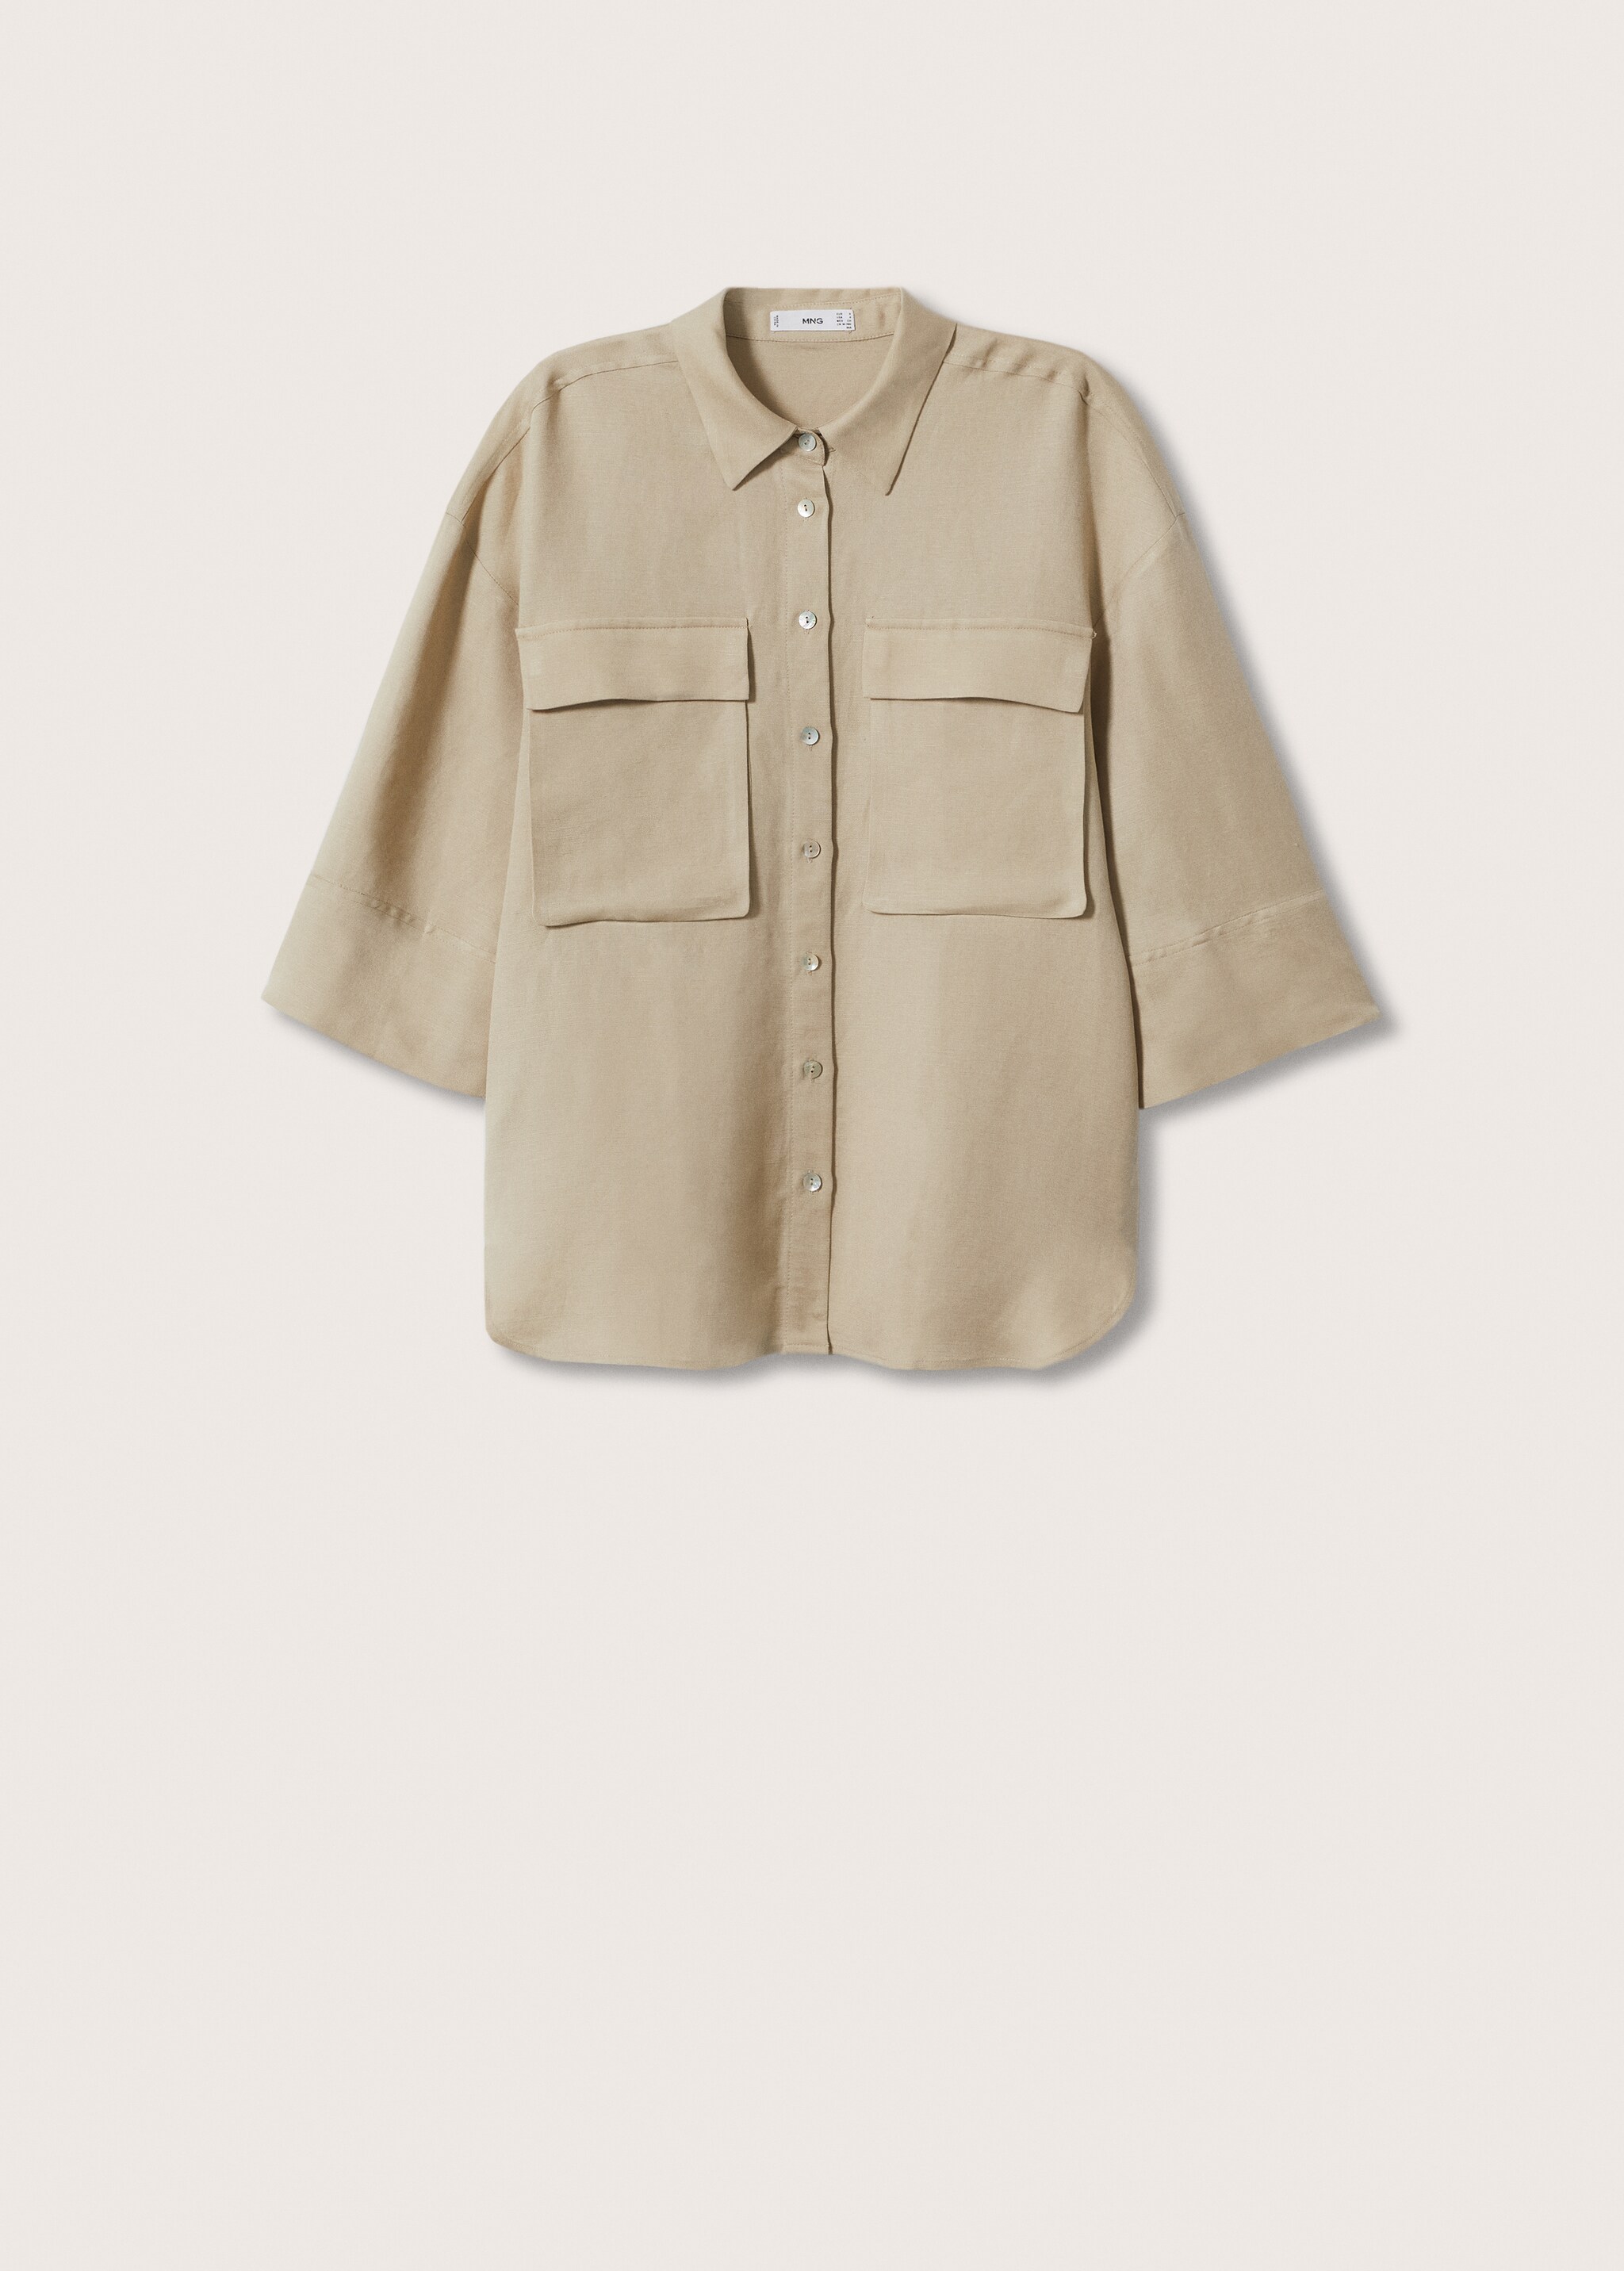 Pocket linen shirt - Article without model